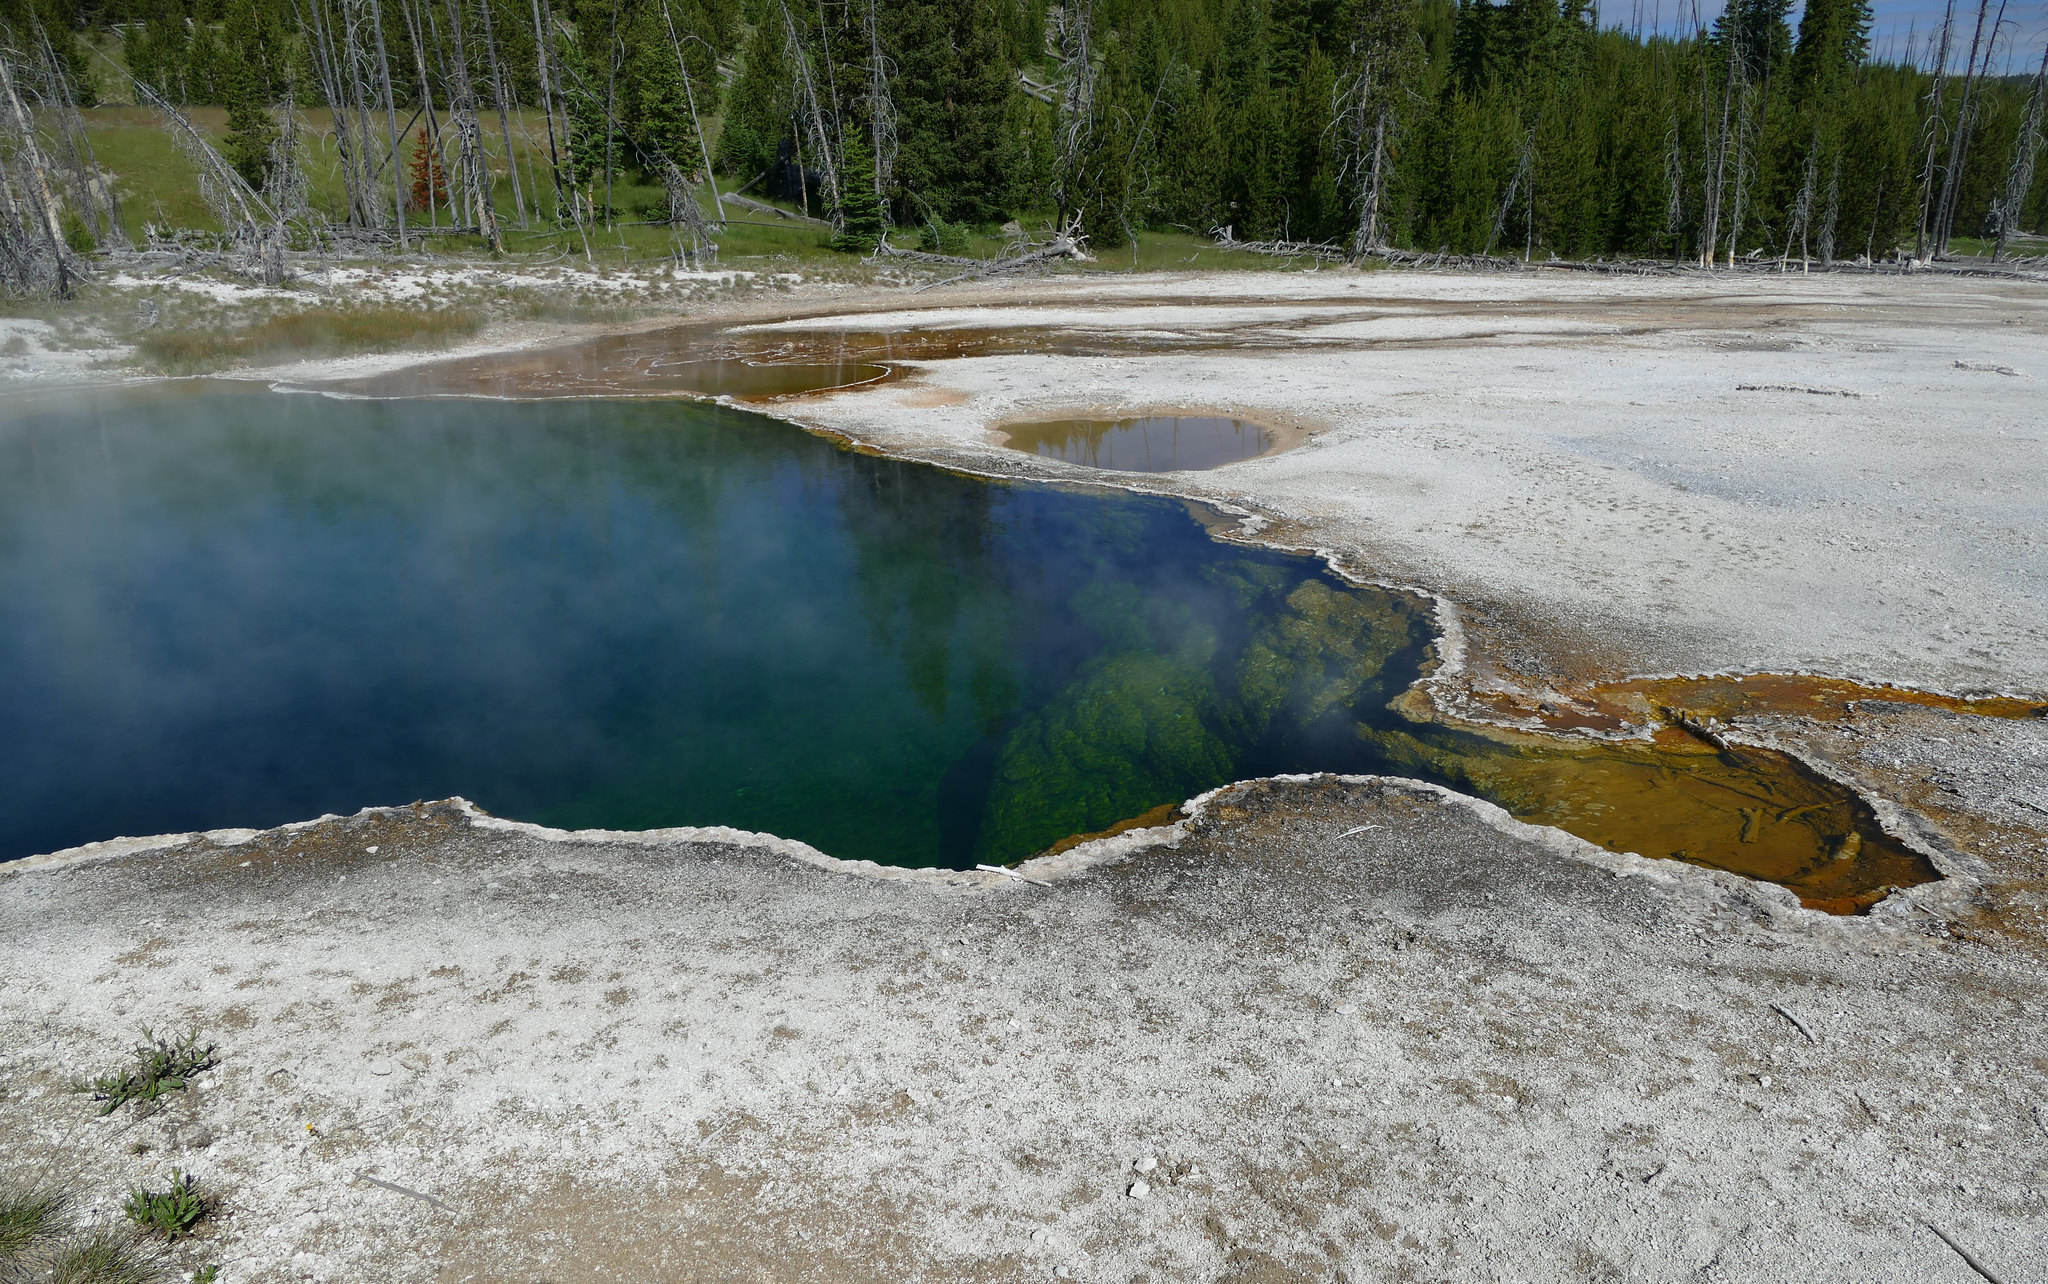 PHOTO: Abyss Pool at West Thumb Geyser Basin.